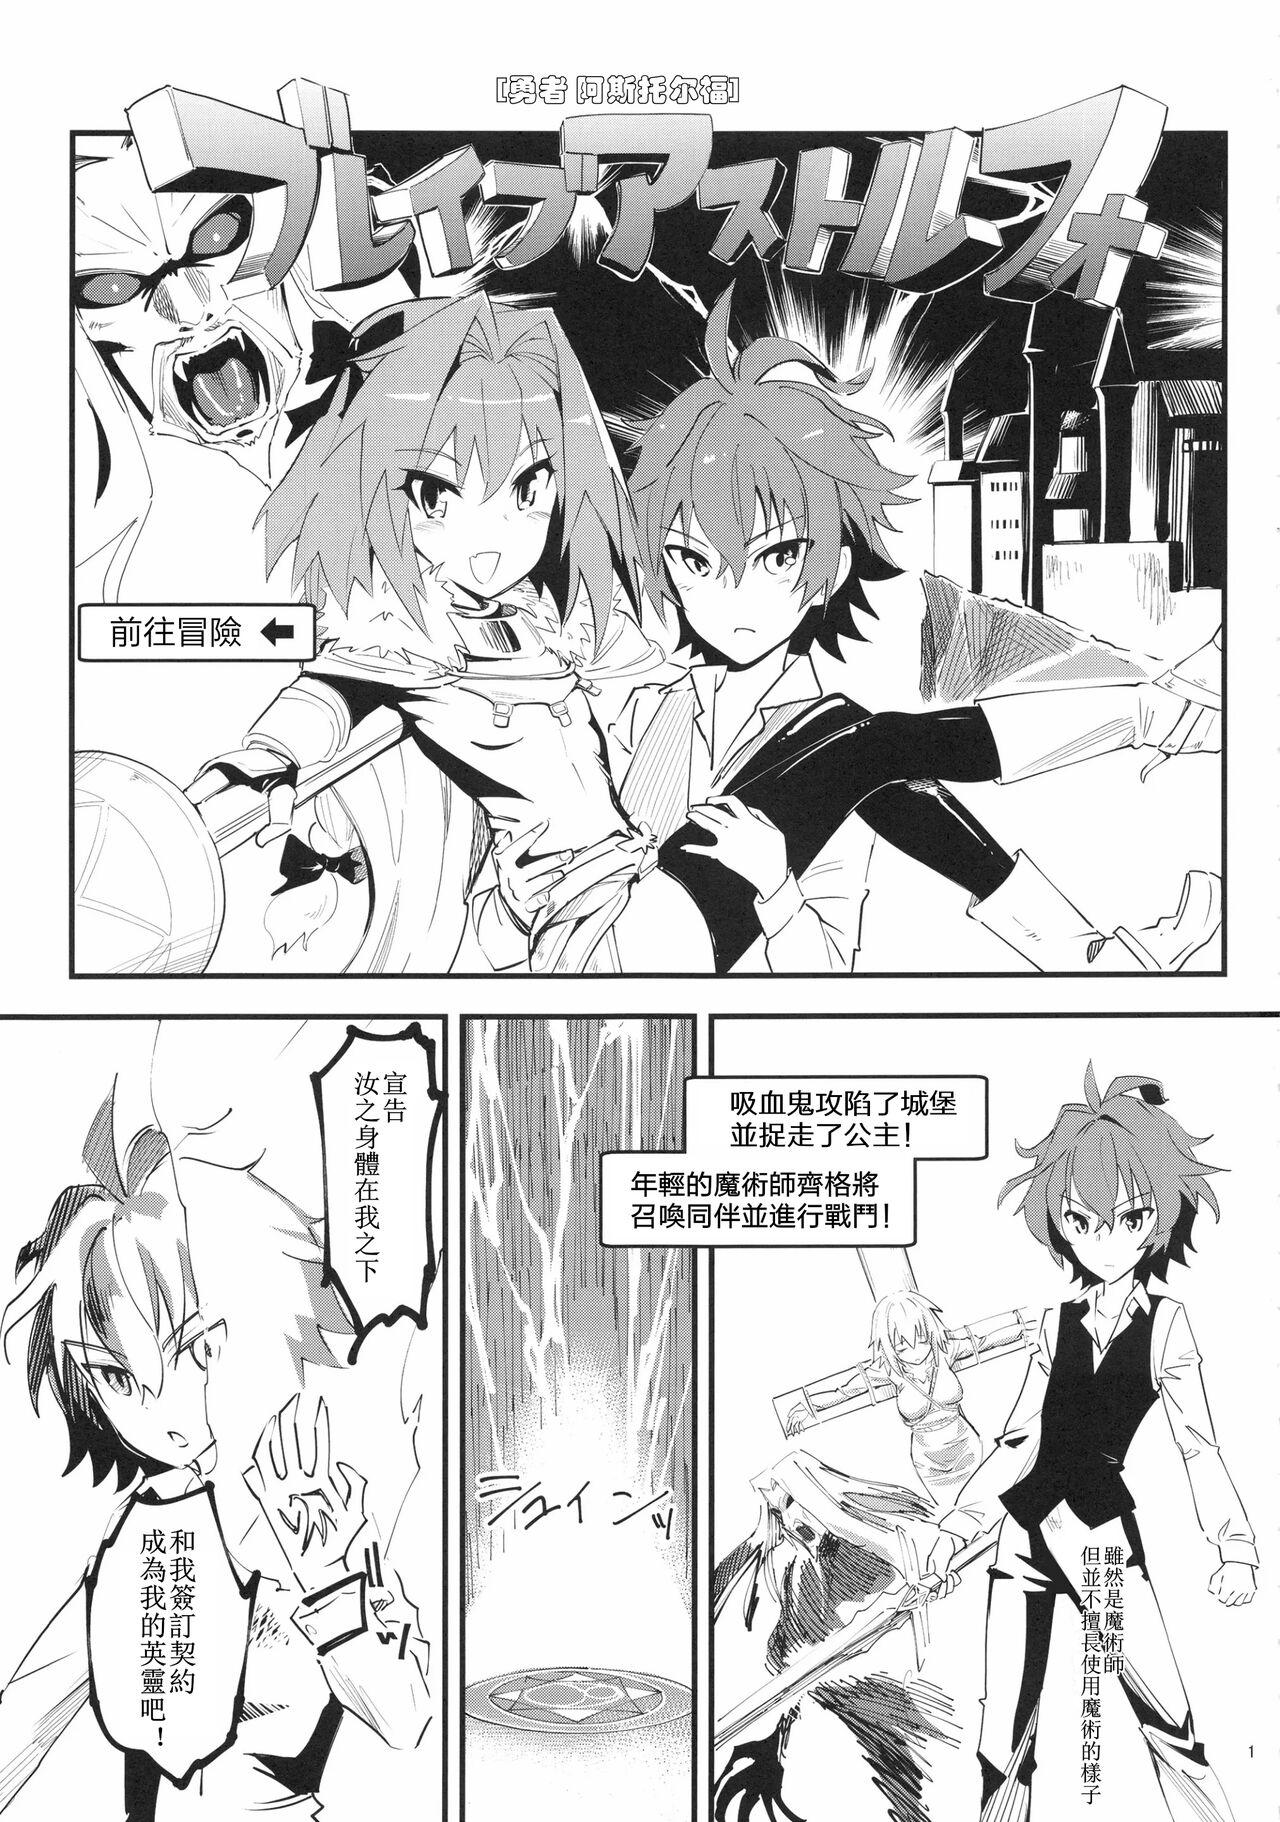 Flaca CLASS CHANGE!! Brave Astolfo - Fate apocrypha Chica - Page 3